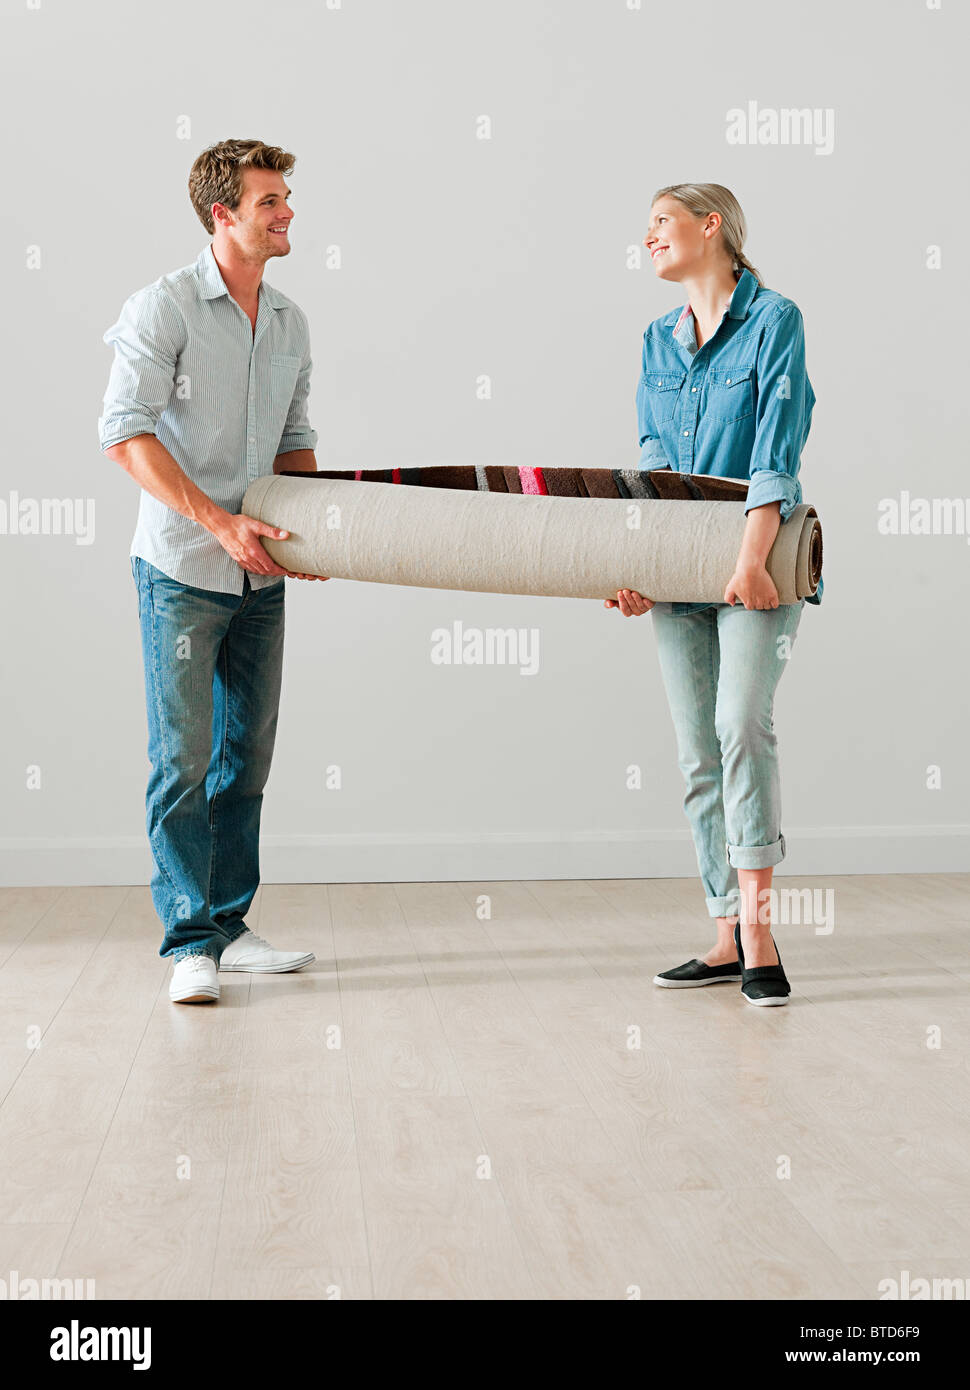 Jeune couple carrying a rolled up rug Banque D'Images